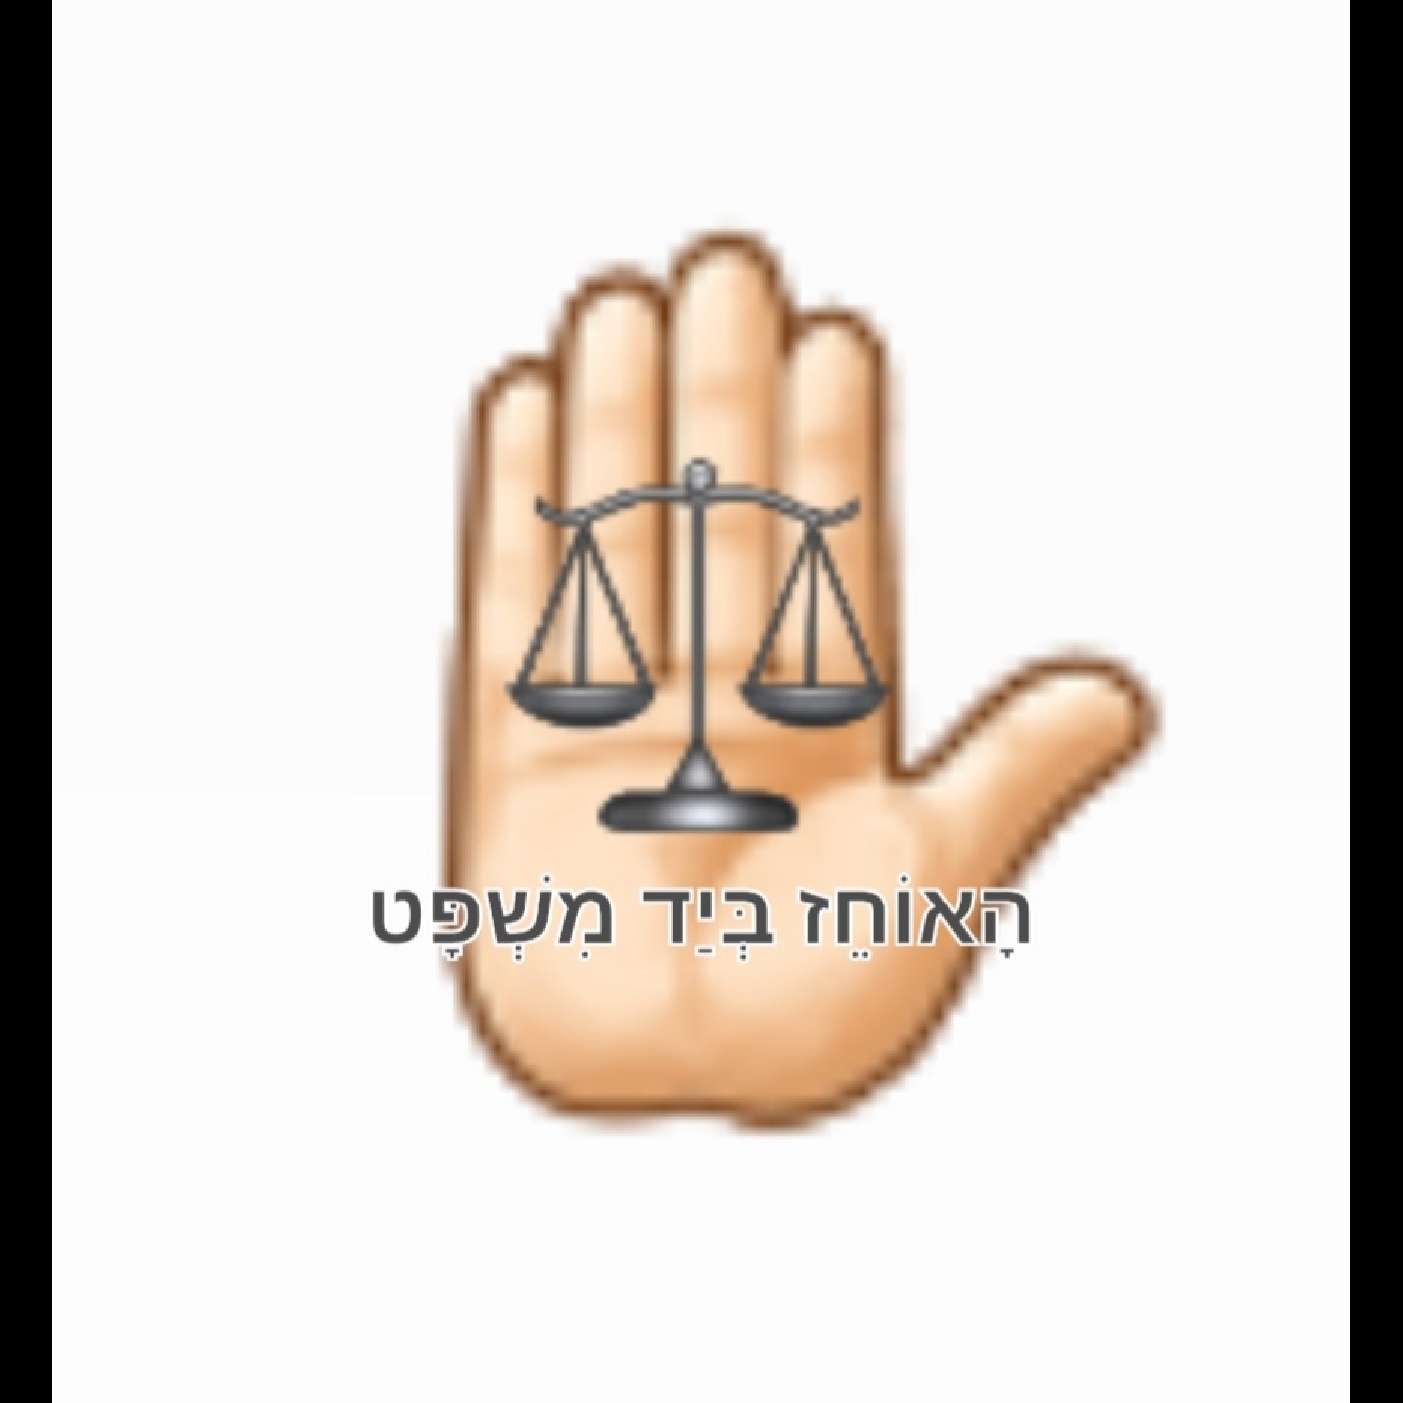 Mussar Minutes - Ha'azinu: Yomim Nora'im Review - Justice in Hand ⚖ ✊🏻